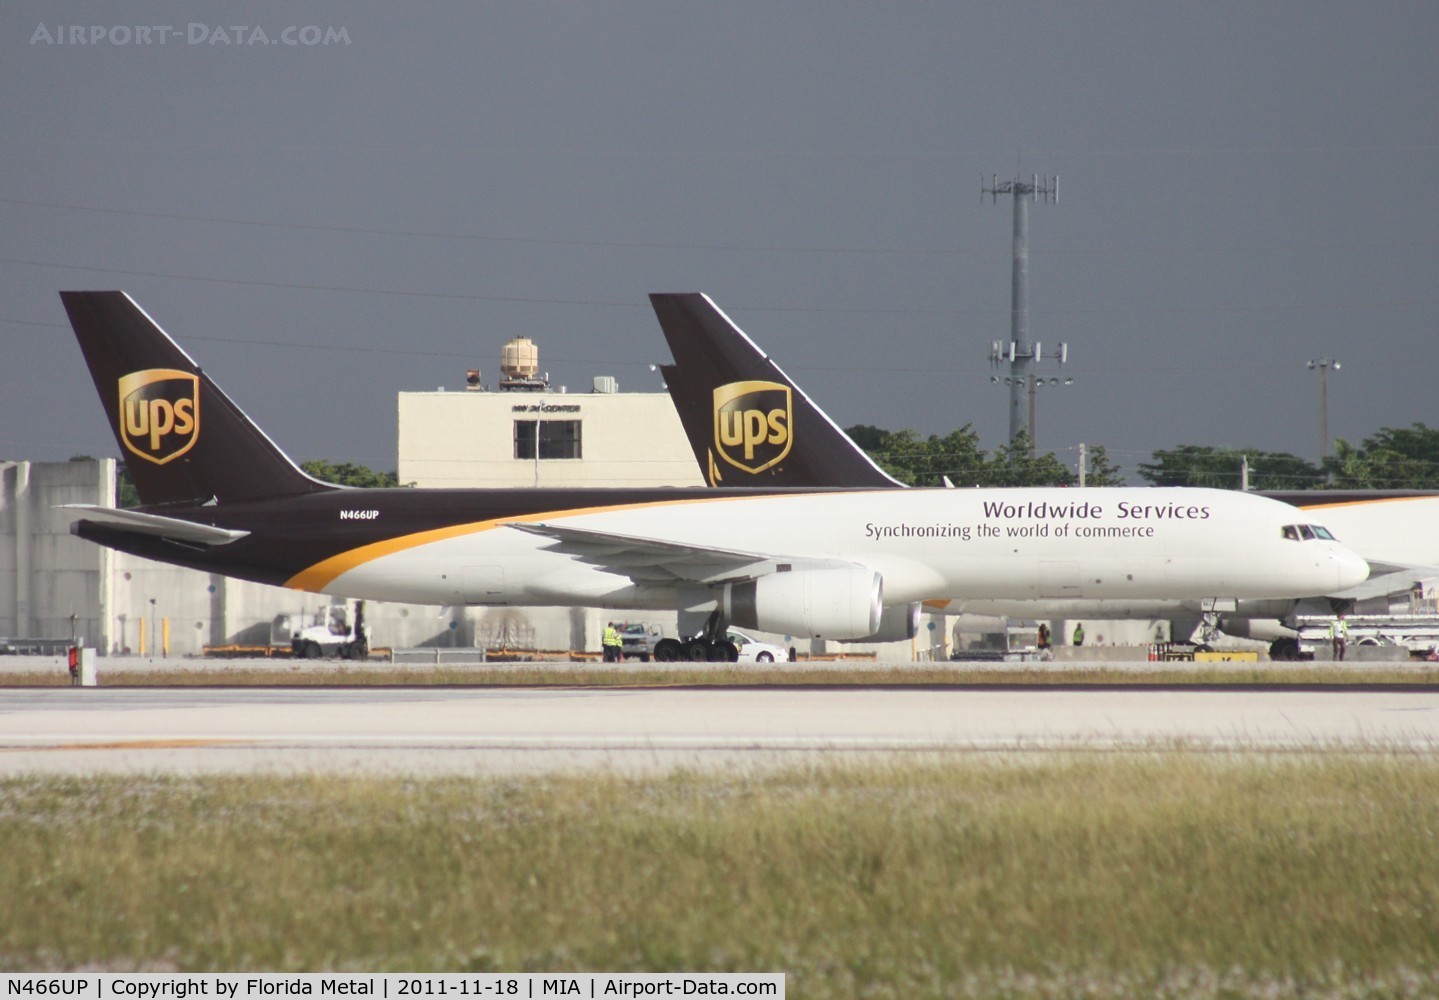 N466UP, 1997 Boeing 757-24APF C/N 25482, UPS 757 across from the photo holes